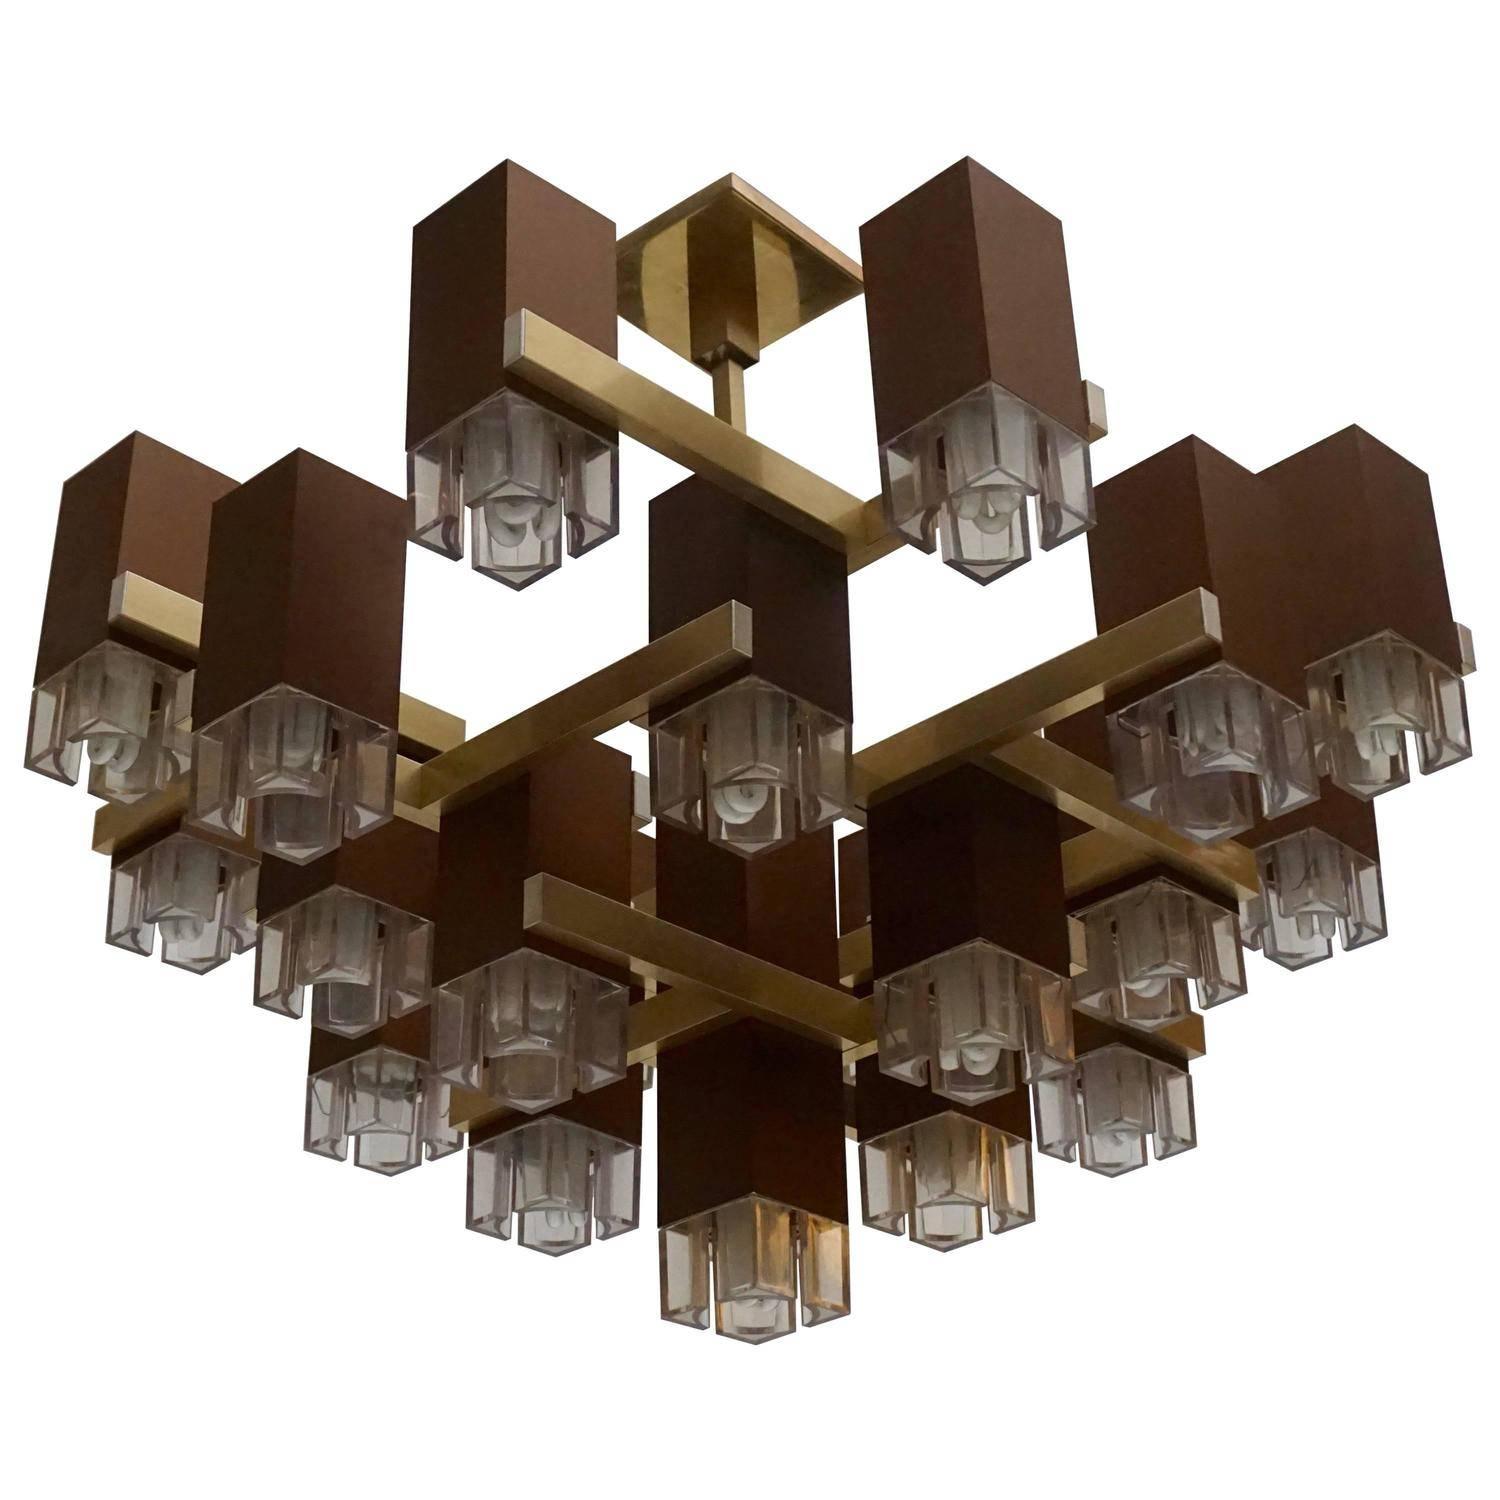 Pristine Sciolari 20 cubic lacquered brass chandelier, 1970s, Italia.
Prime quality material, solid conception and construction, fine assembly and craftsmanship.
A pull down and push up mechanism move the acrylic lens for easy bulbs